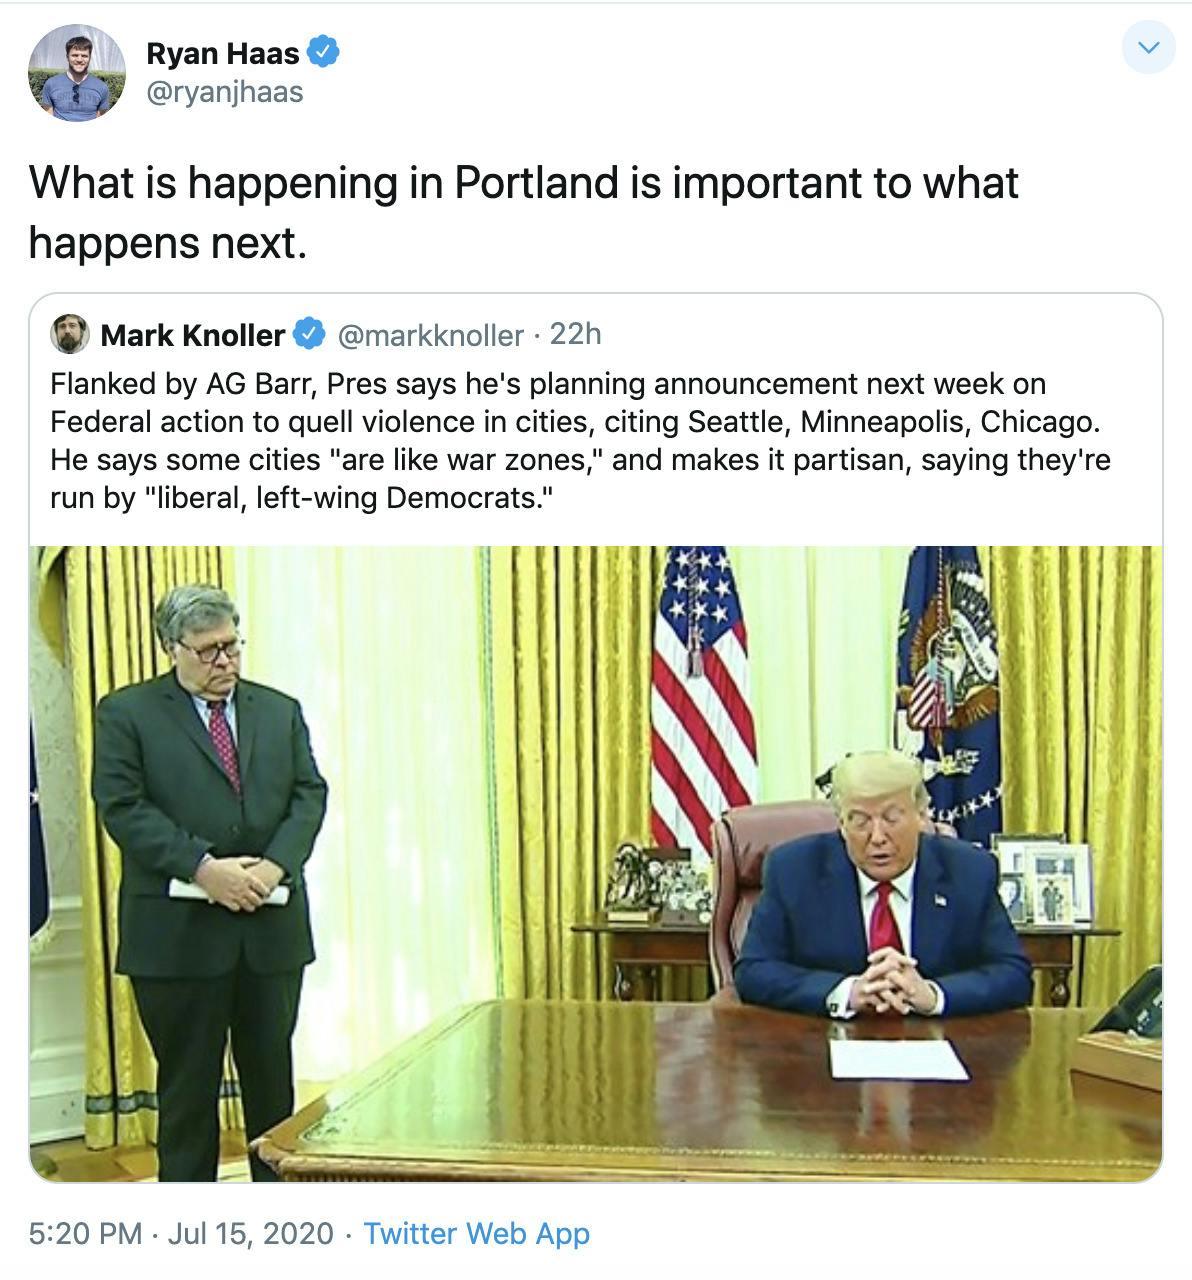 Ryan Haas "What is happening in Portland is important to what happens next." attached to tweet by Mark Knoller saying "Flanked by AG Barr, Pres says he's planning announcement next week on Federal action to quell violence in cities, citing Seattle, Minneapolis, Chicago. He says some cities "are like war zones," and makes it partisan, saying they're run by "liberal, left-wing Democrats."